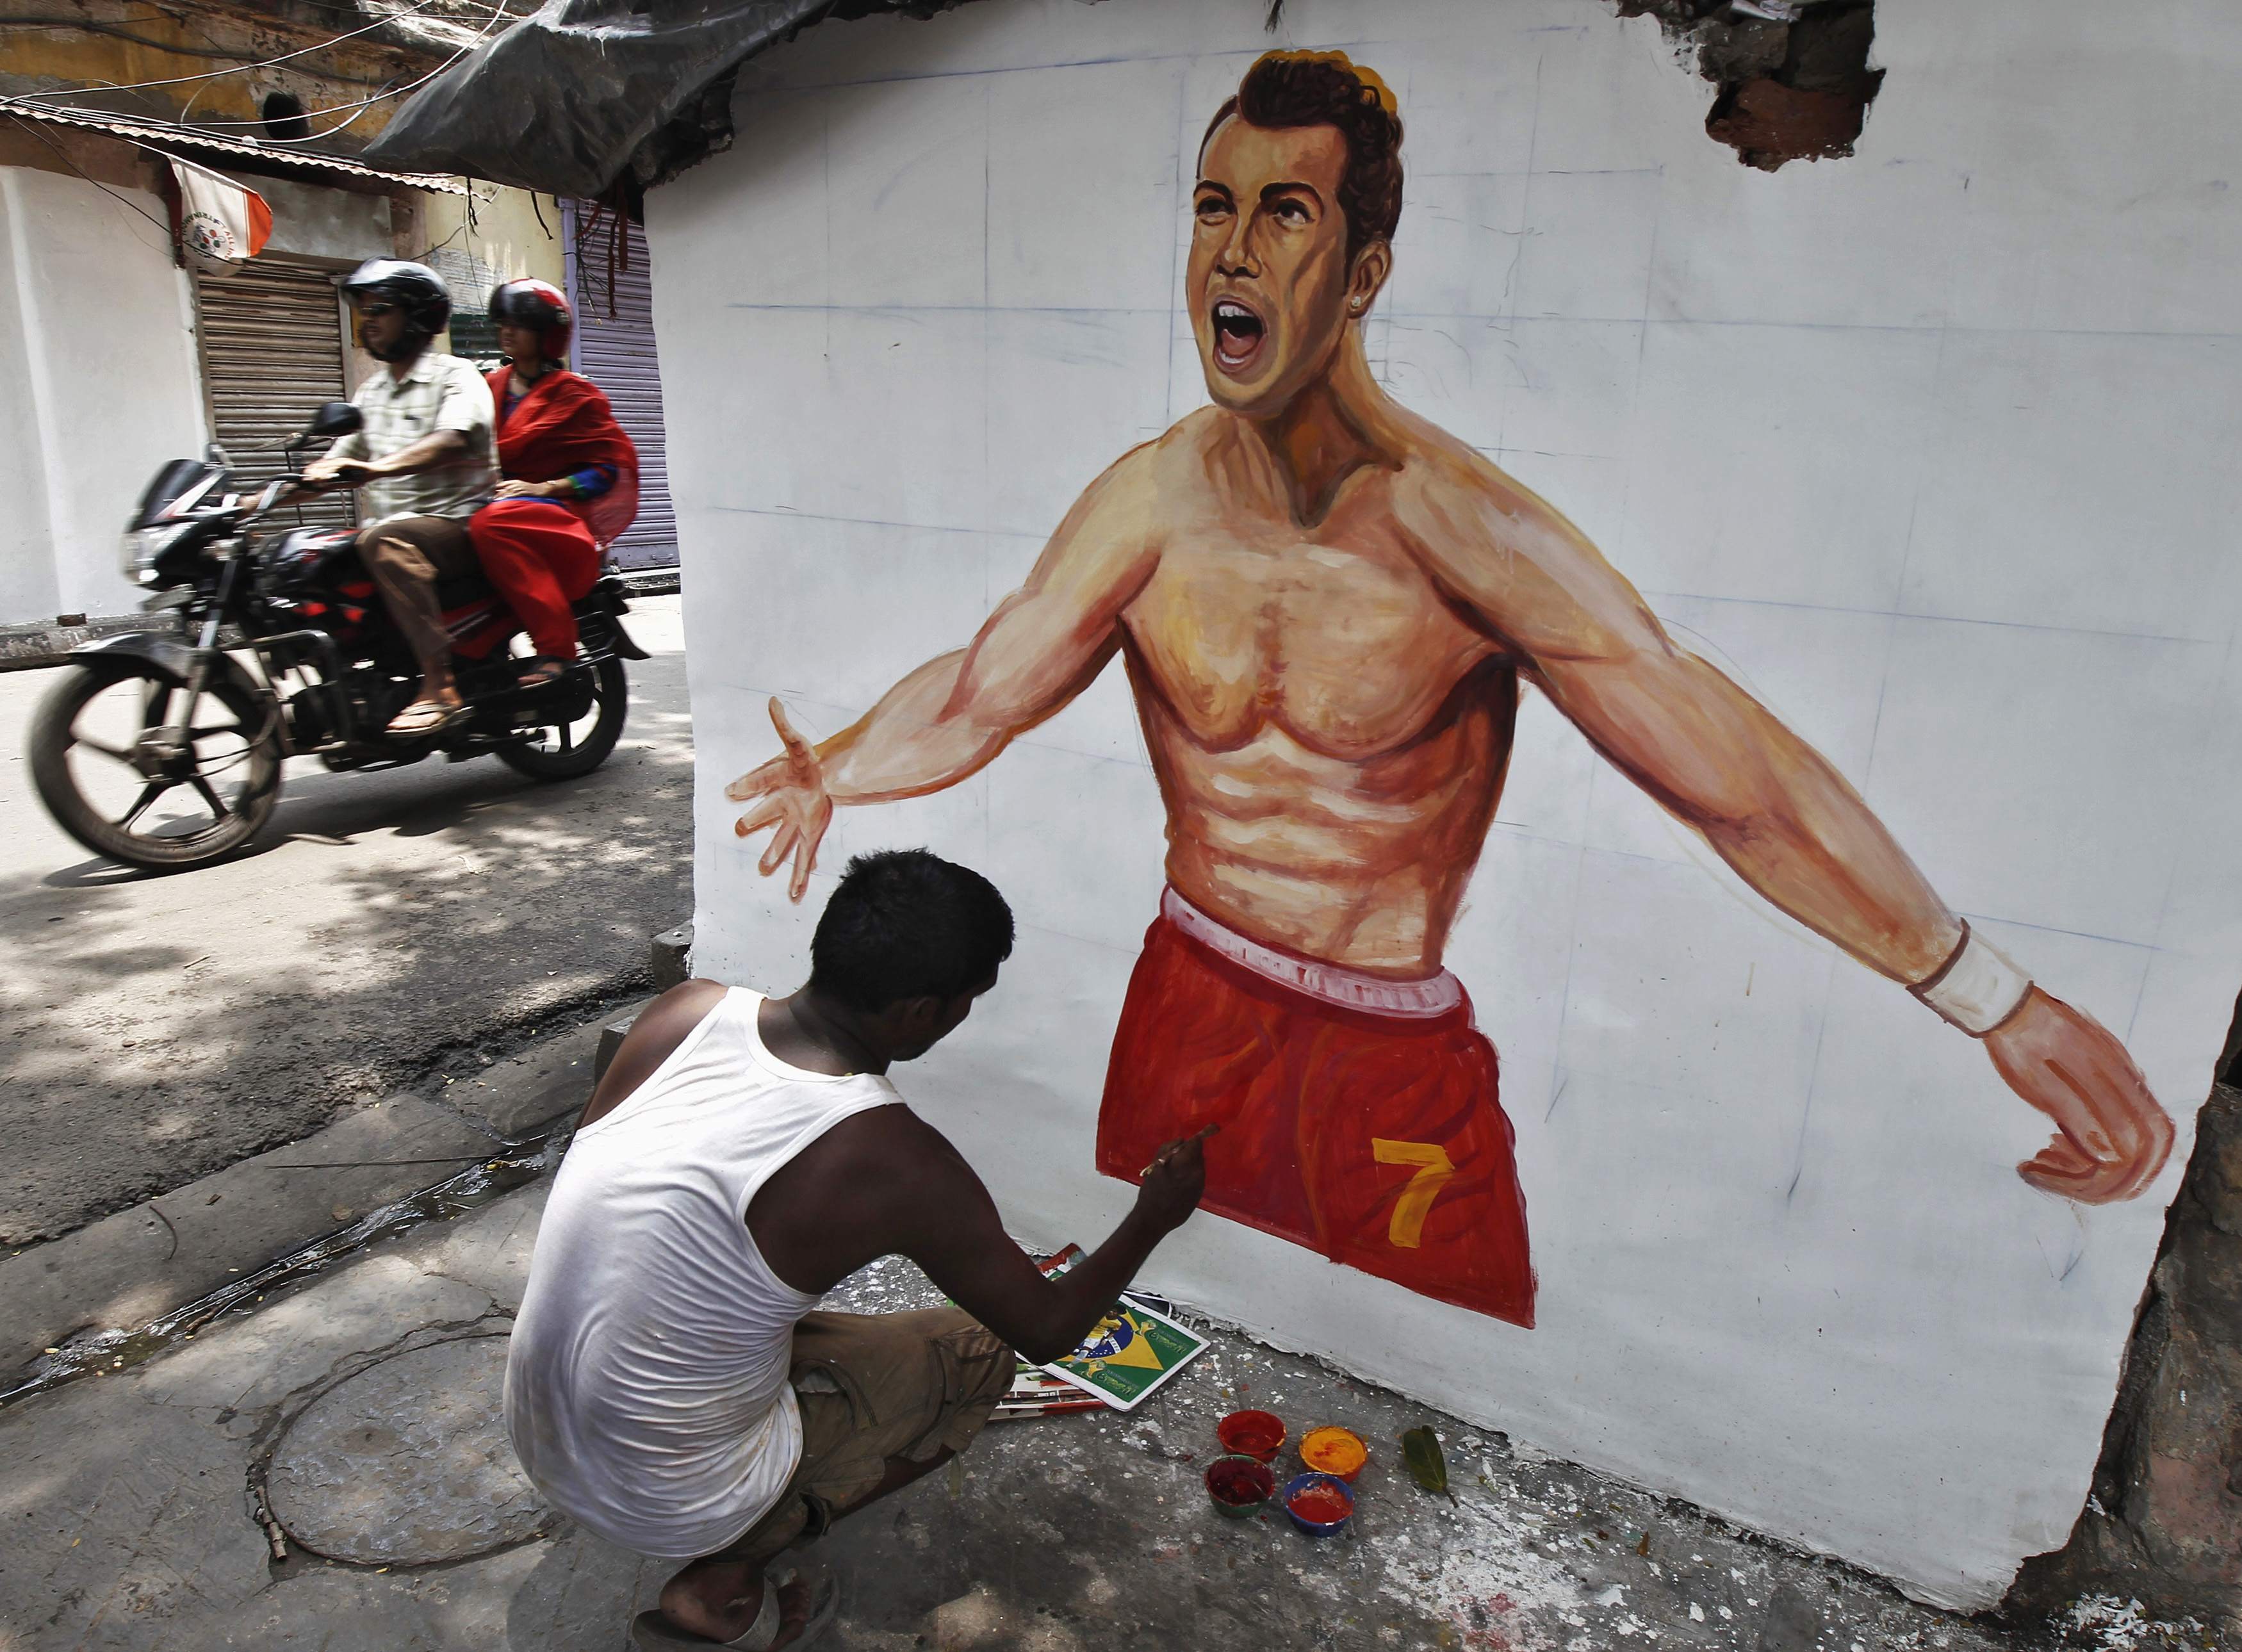 An artisan paints the wall of a house with a picture of Portugal's national soccer player Cristiano Ronaldo, in Kolkata June 12, 2014. The 2014 World Cup soccer tournament will be held in 12 cities in Brazil from June 12 to July 13. REUTERS/Rupak De Chowd